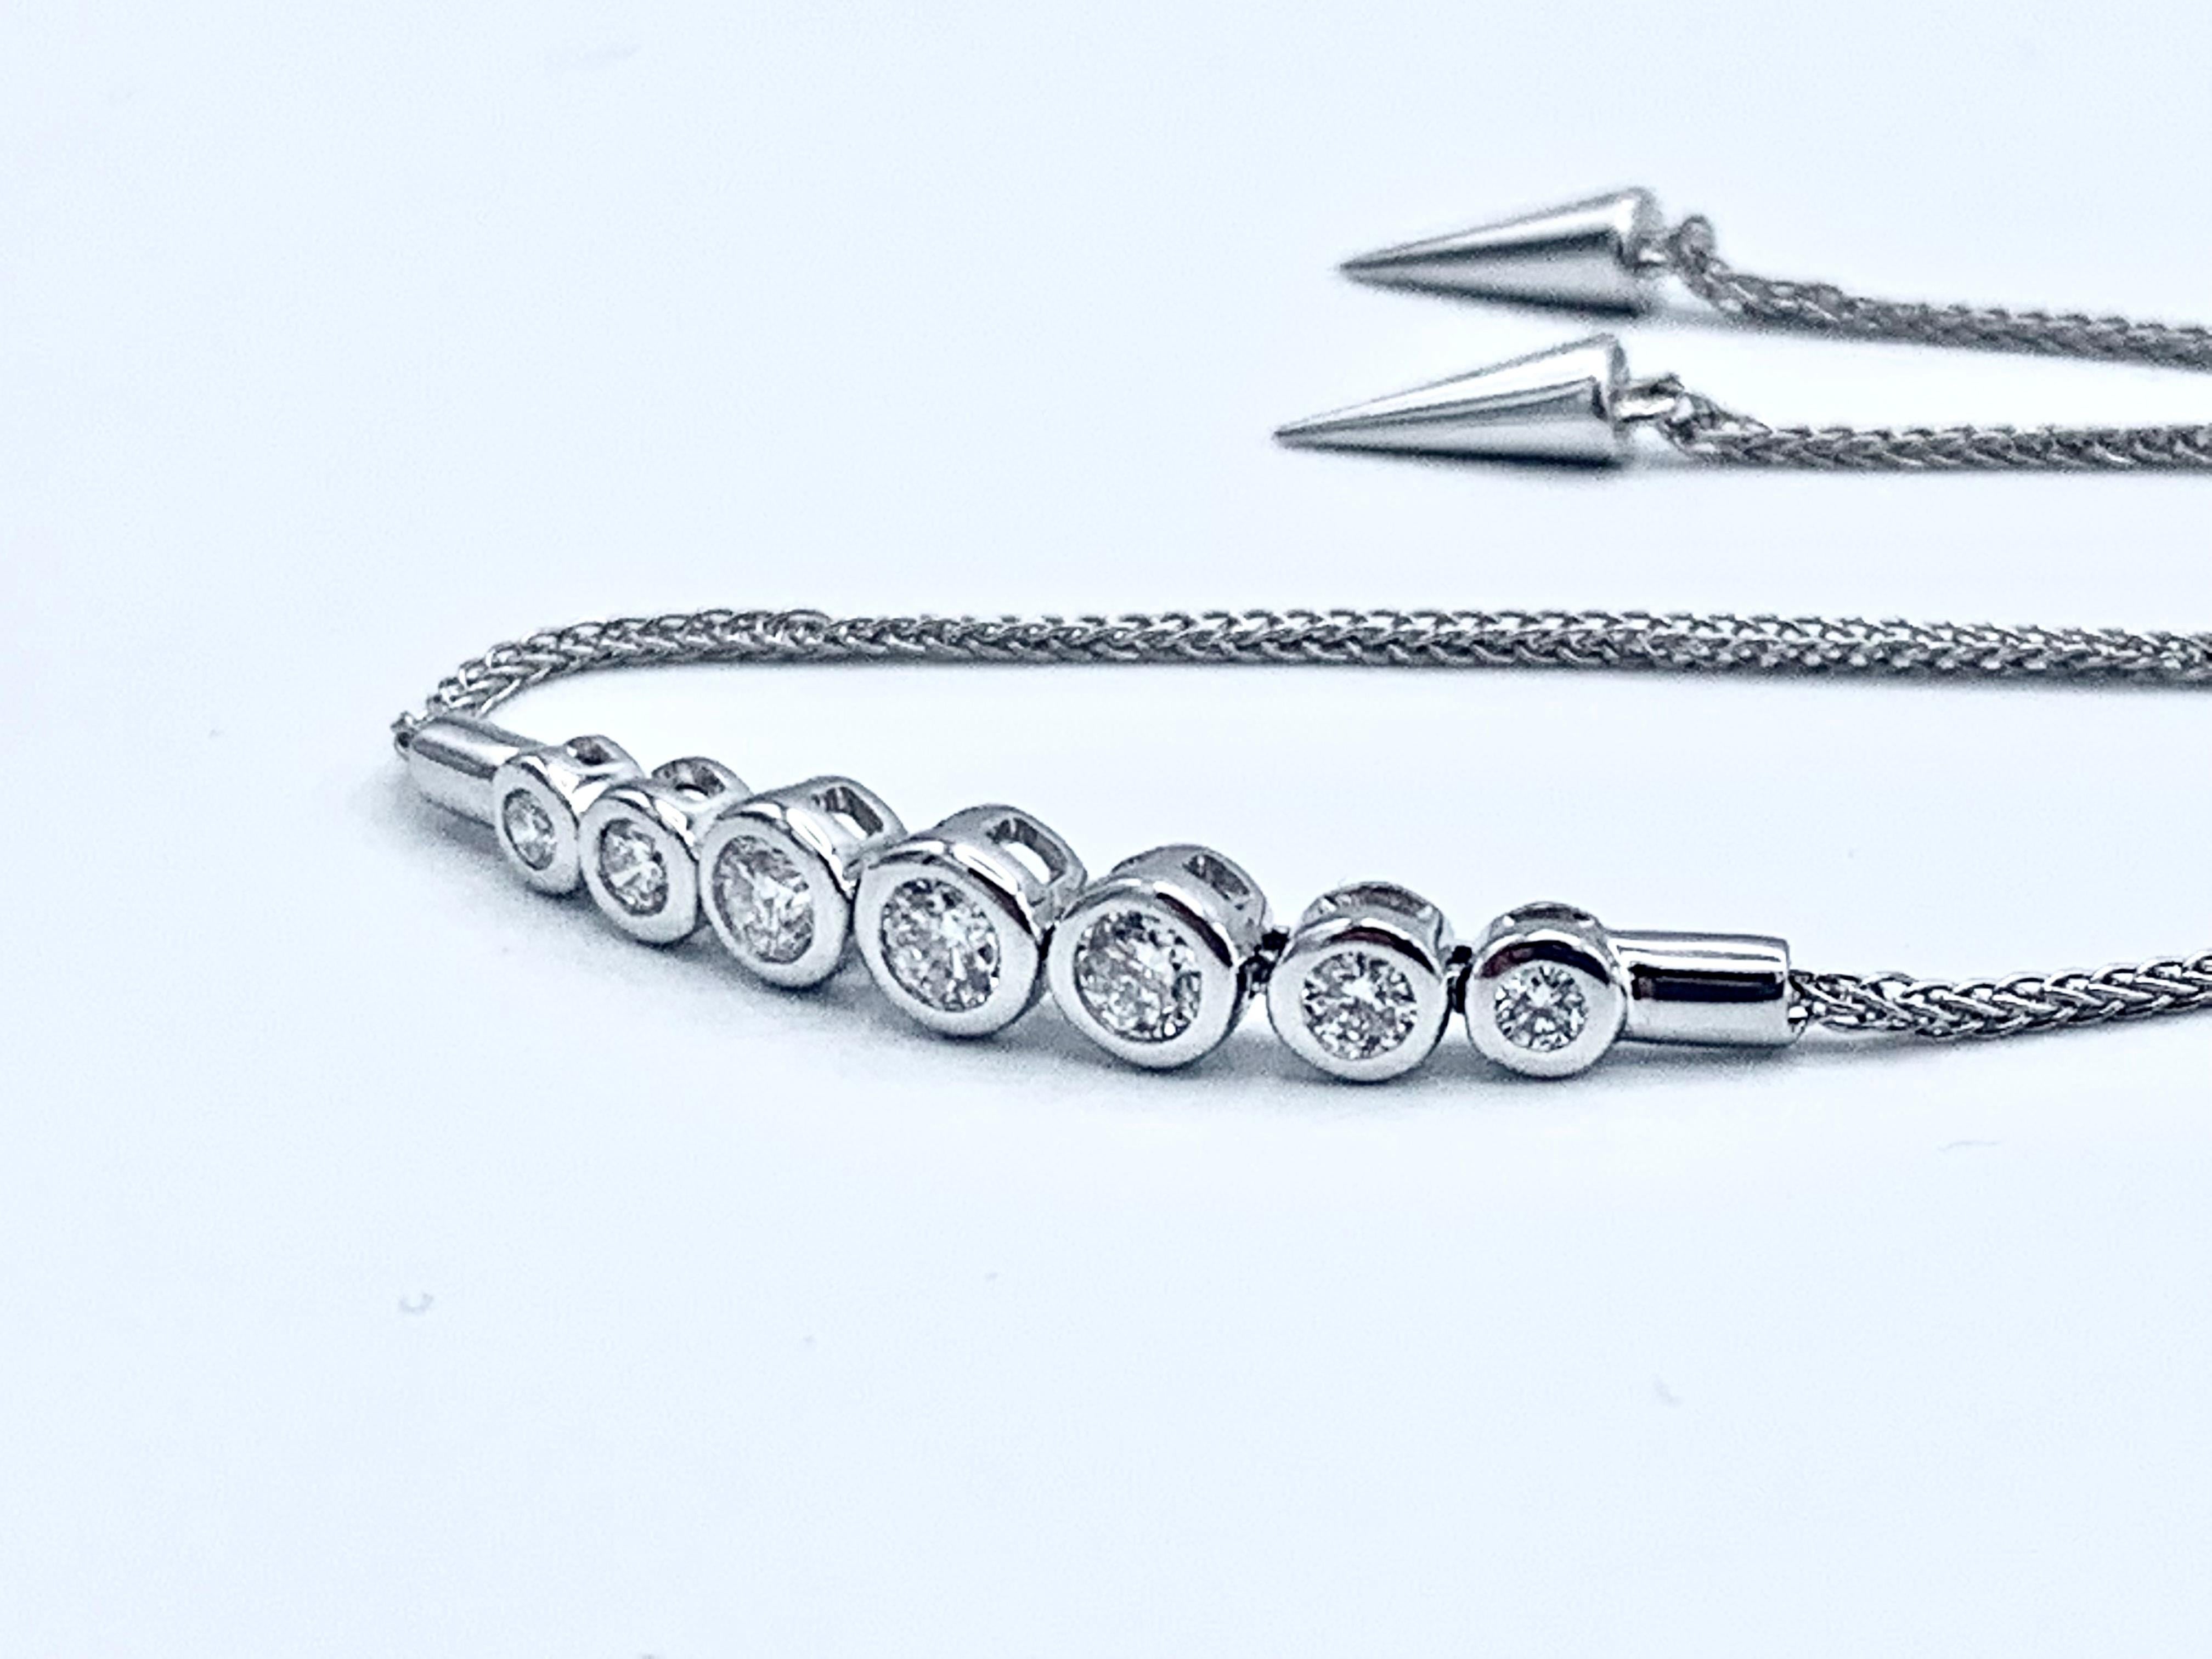 This beautiful bracelet consists of 14 karat white gold and 7 round SI1 G-H diamonds totaling 0.34 carats. These bezel set diamonds graduate towards the center. The bracelet is finished by a 14 karat white gold wheat chain that is adjustable like a